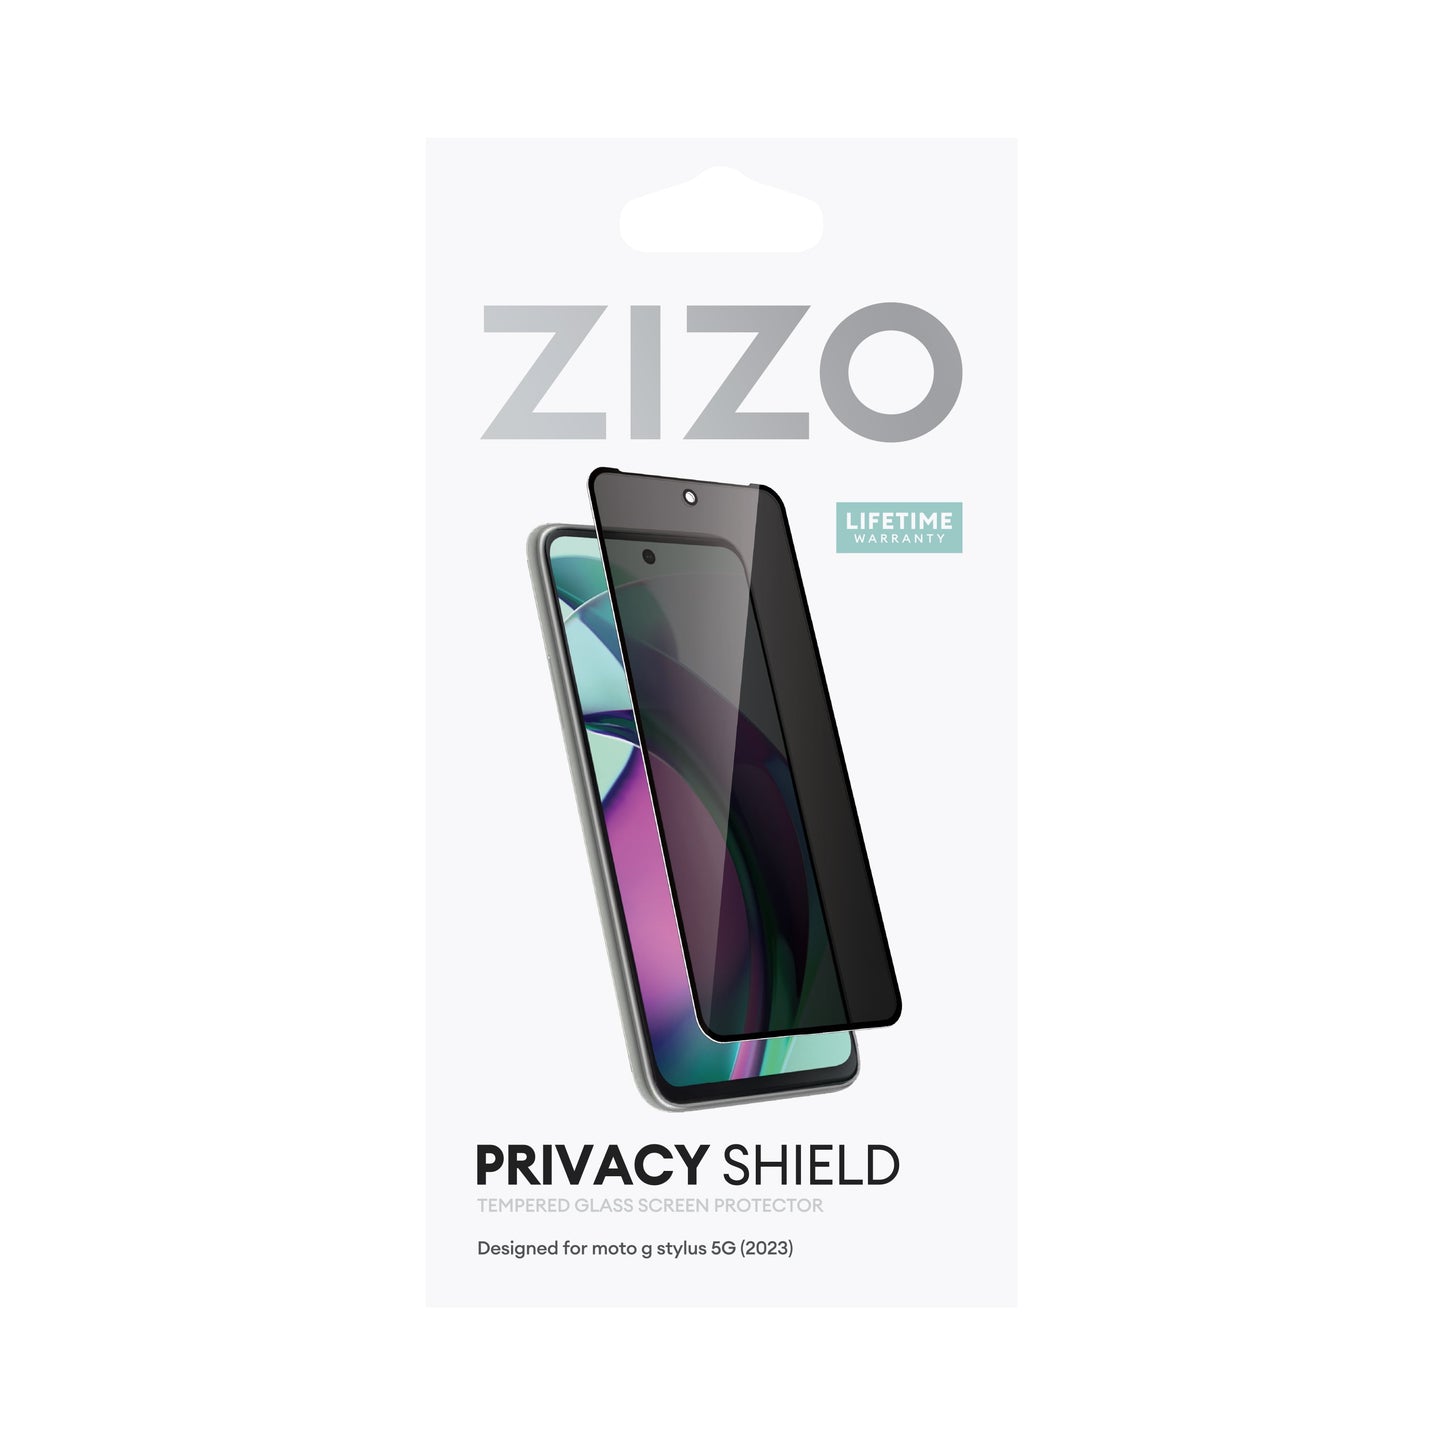 ZIZO PRIVACY Tempered Glass Screen Protector for moto g stylus 5G (2023) - Privacy